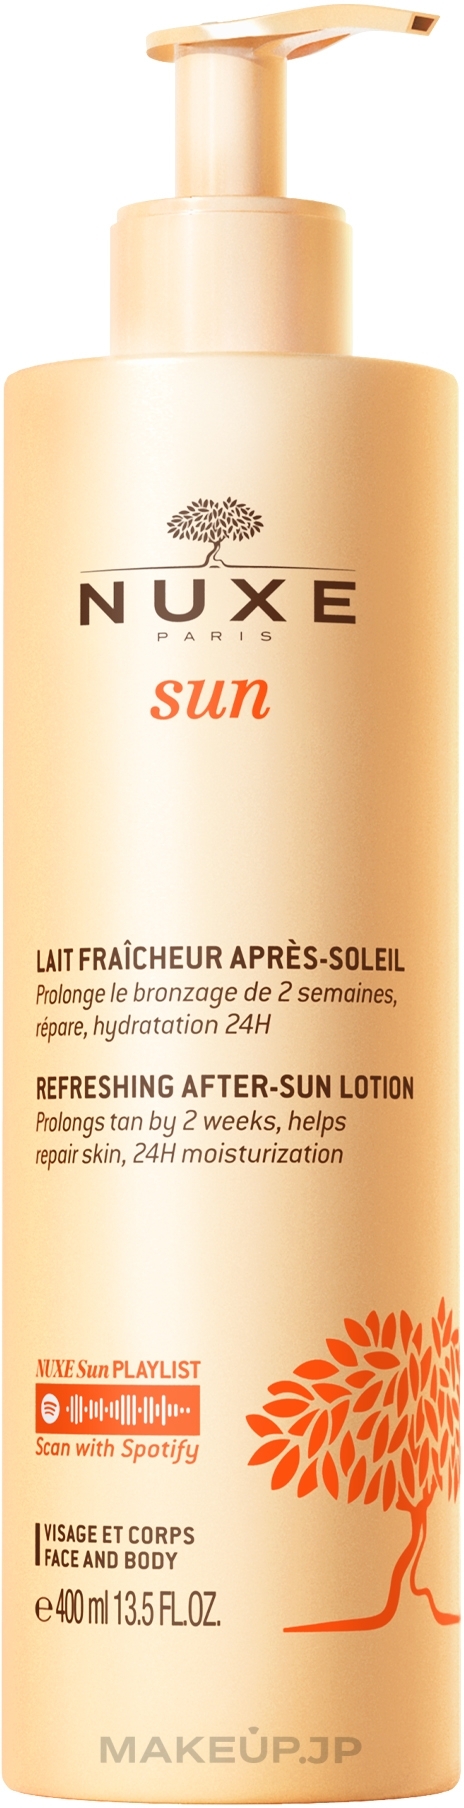 After Sun Lotion - Nuxe Sun Refreshing After-Sun Lotion — photo 400 ml